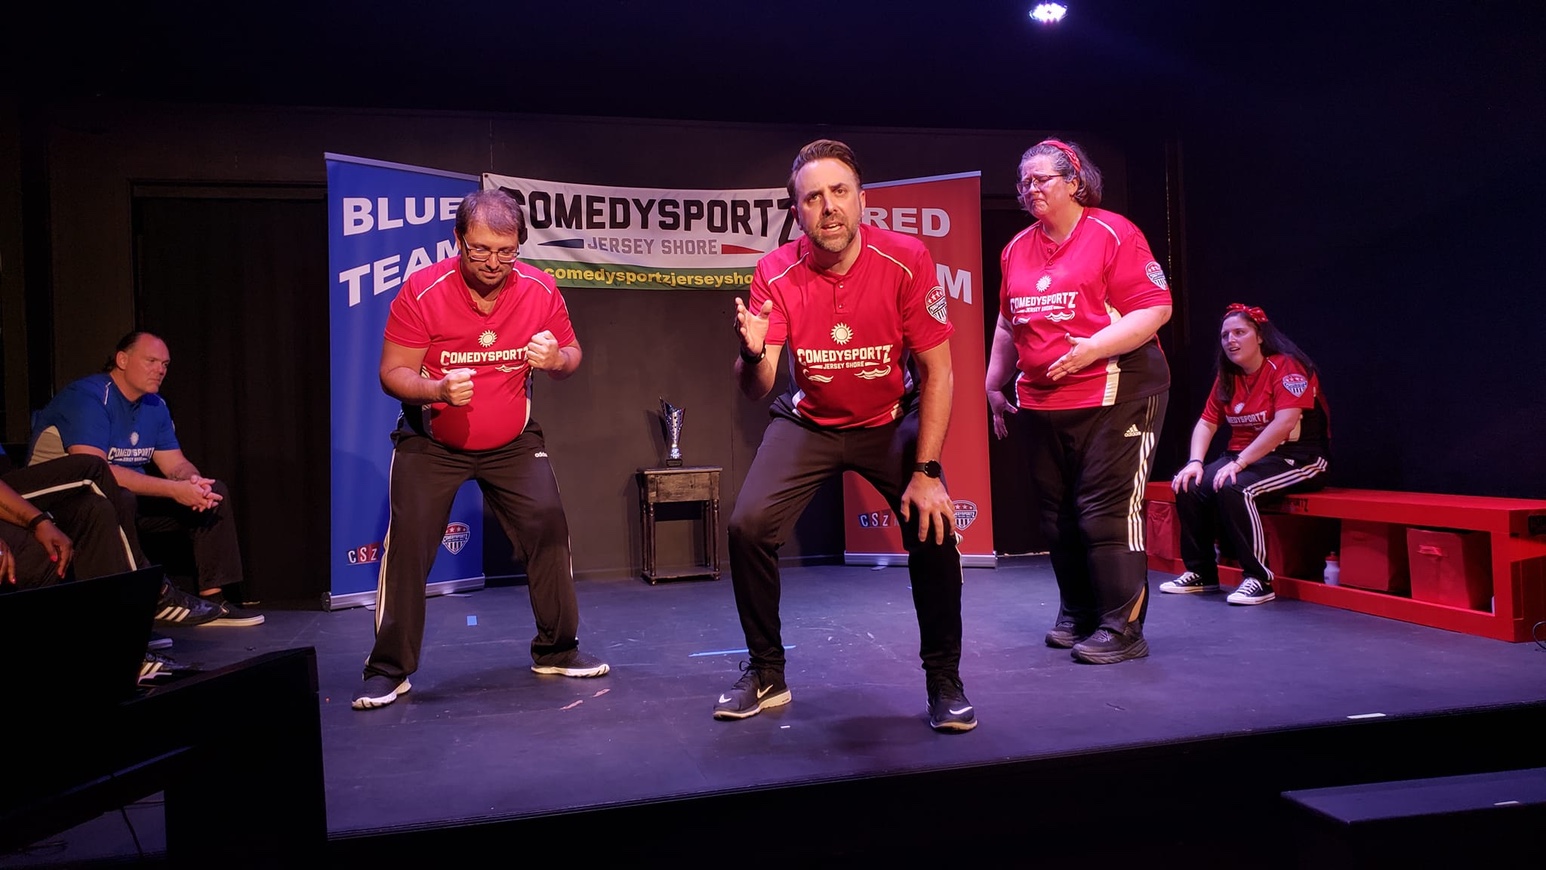 ComedySportz Jersey Shore improvisers on stage